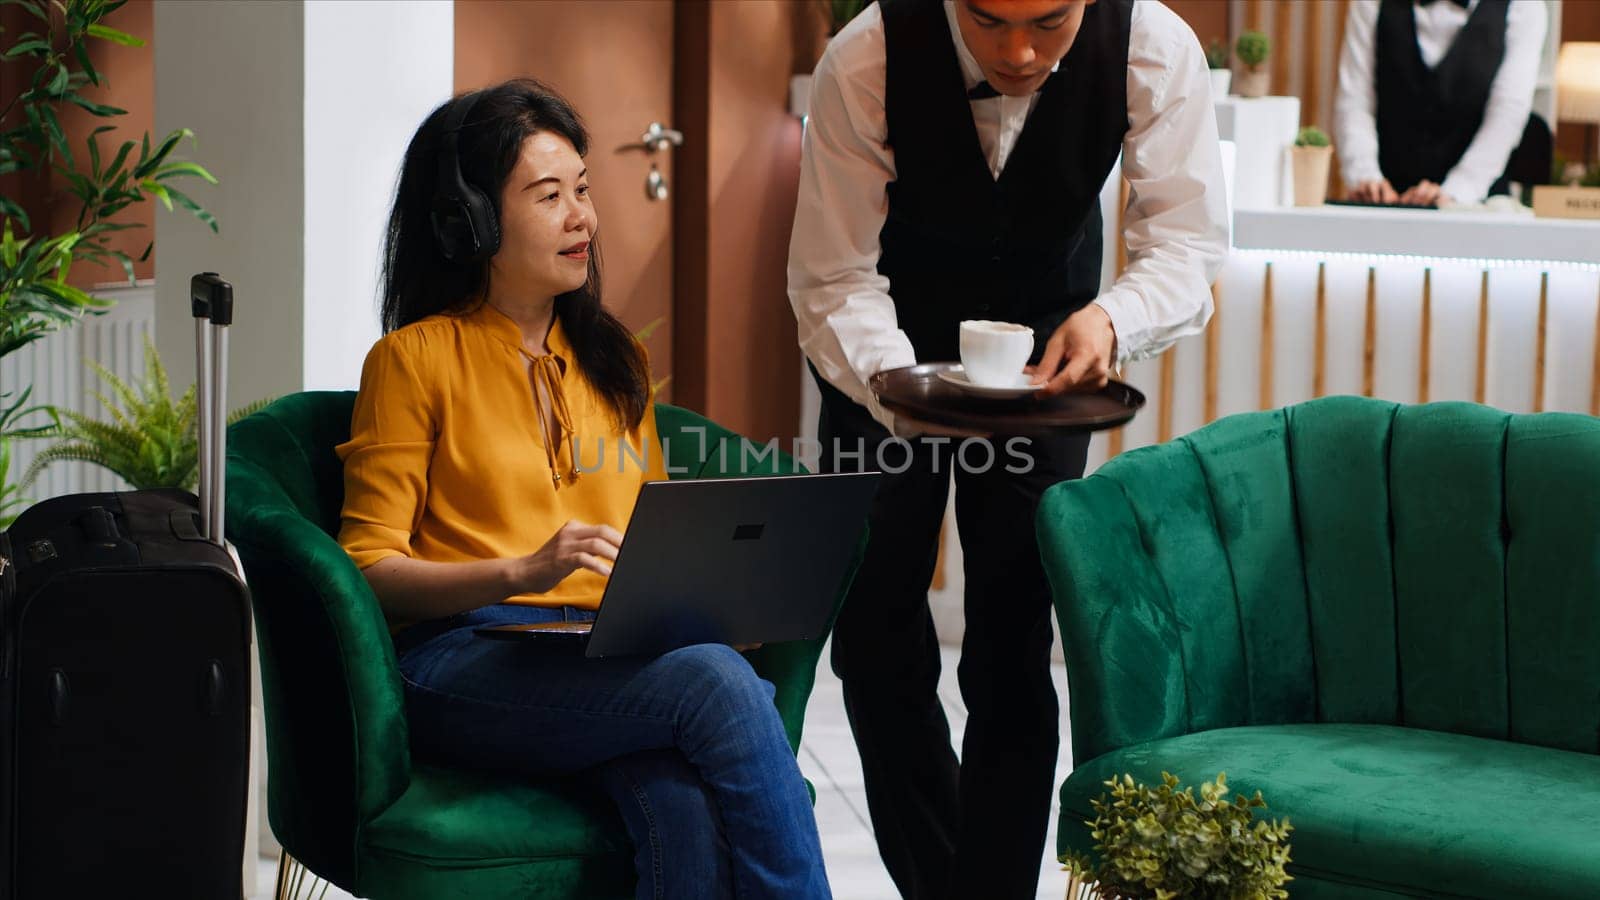 Asian woman receiving coffee while she works on laptop, sitting in lounge area at five star hotel and waiting for registration. Waiter serving drinks for guest relaxing, hospitality industry.